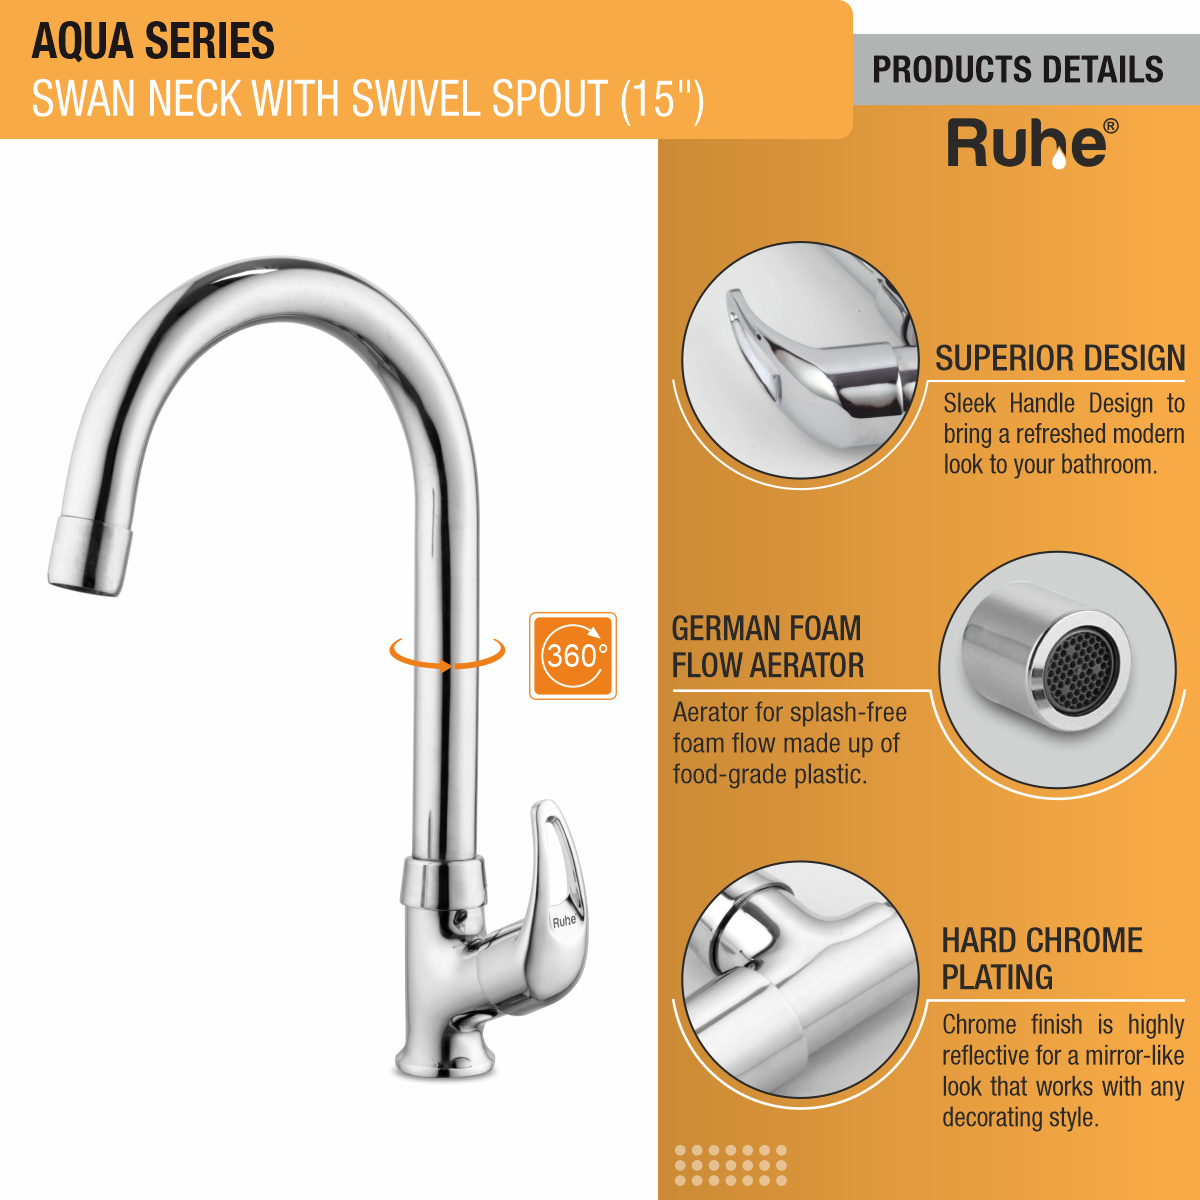 Aqua Swan Neck with Medium (15 inches) Round Swivel Spout Faucet product details